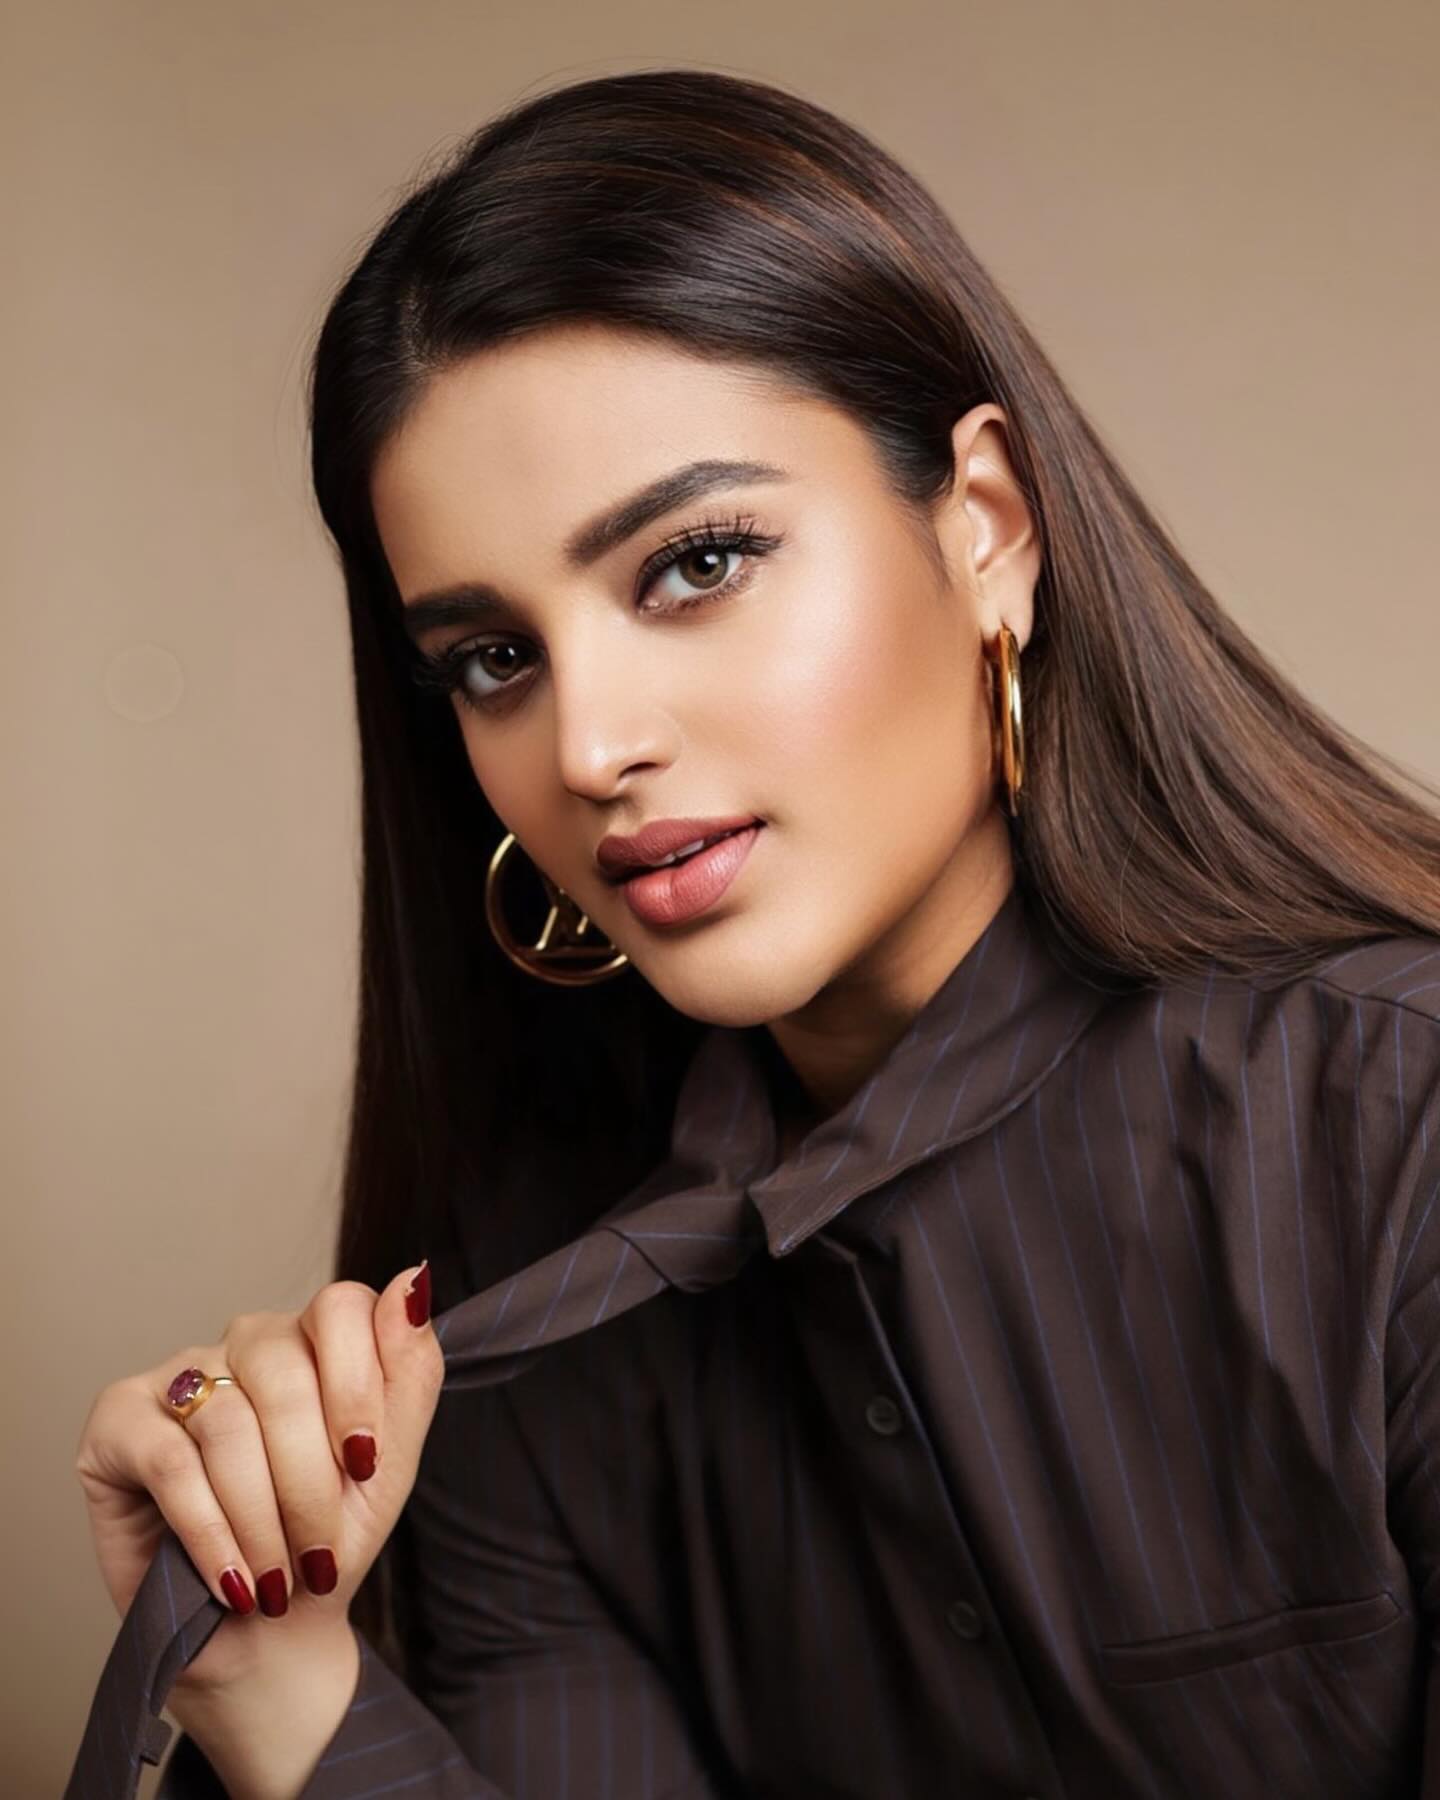 Nidhhi Agerwal Biography, Family, Husband, Boyfriends, DOB, Size, Weight, Height